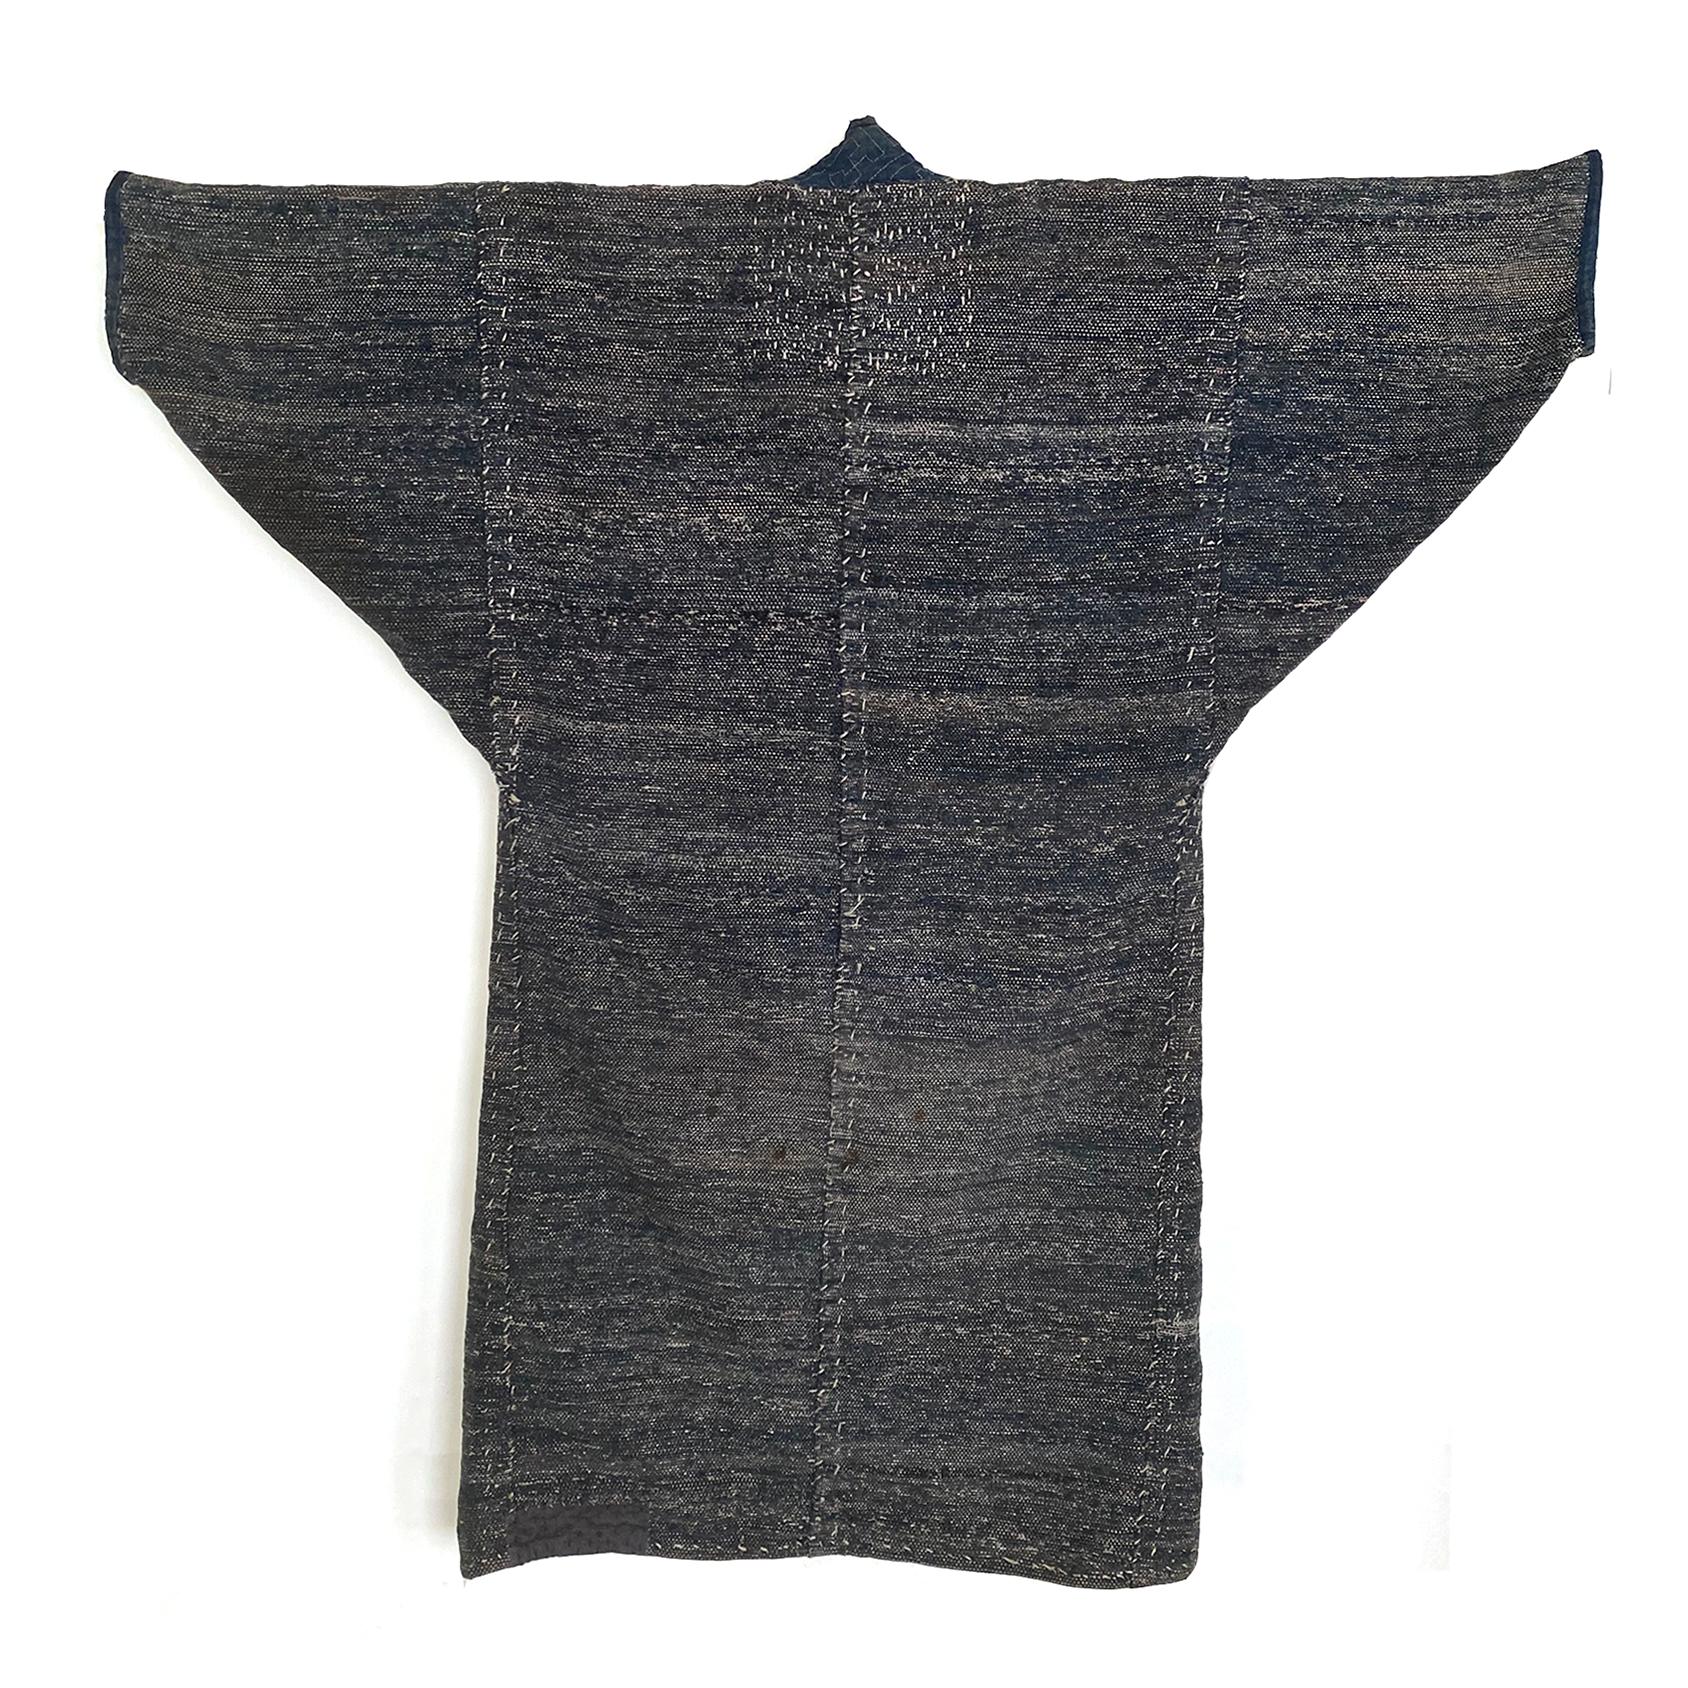 Saki-ori farmers coat, Northern Japan, Meiji period

A very heavy and substantial saki-ori coat, made of cotton with an indigo kasuri lapel. Several patches of hand sewn stitching to reinforce or repair various areas.
     